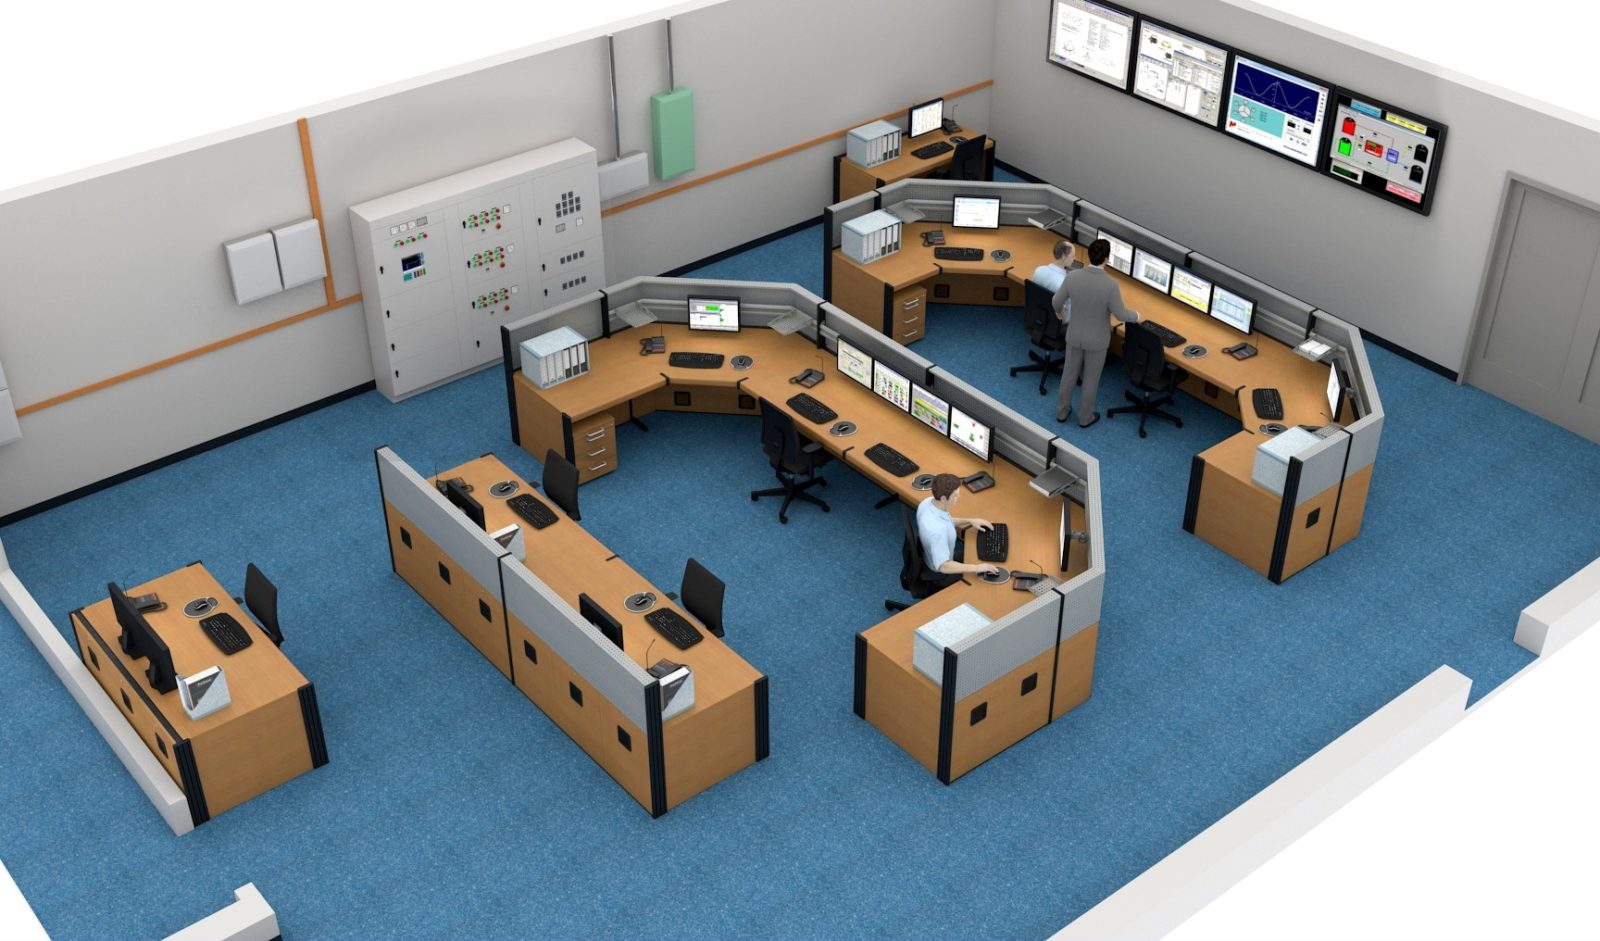 Graphic 3-D illustration of Dacobas workstations in room